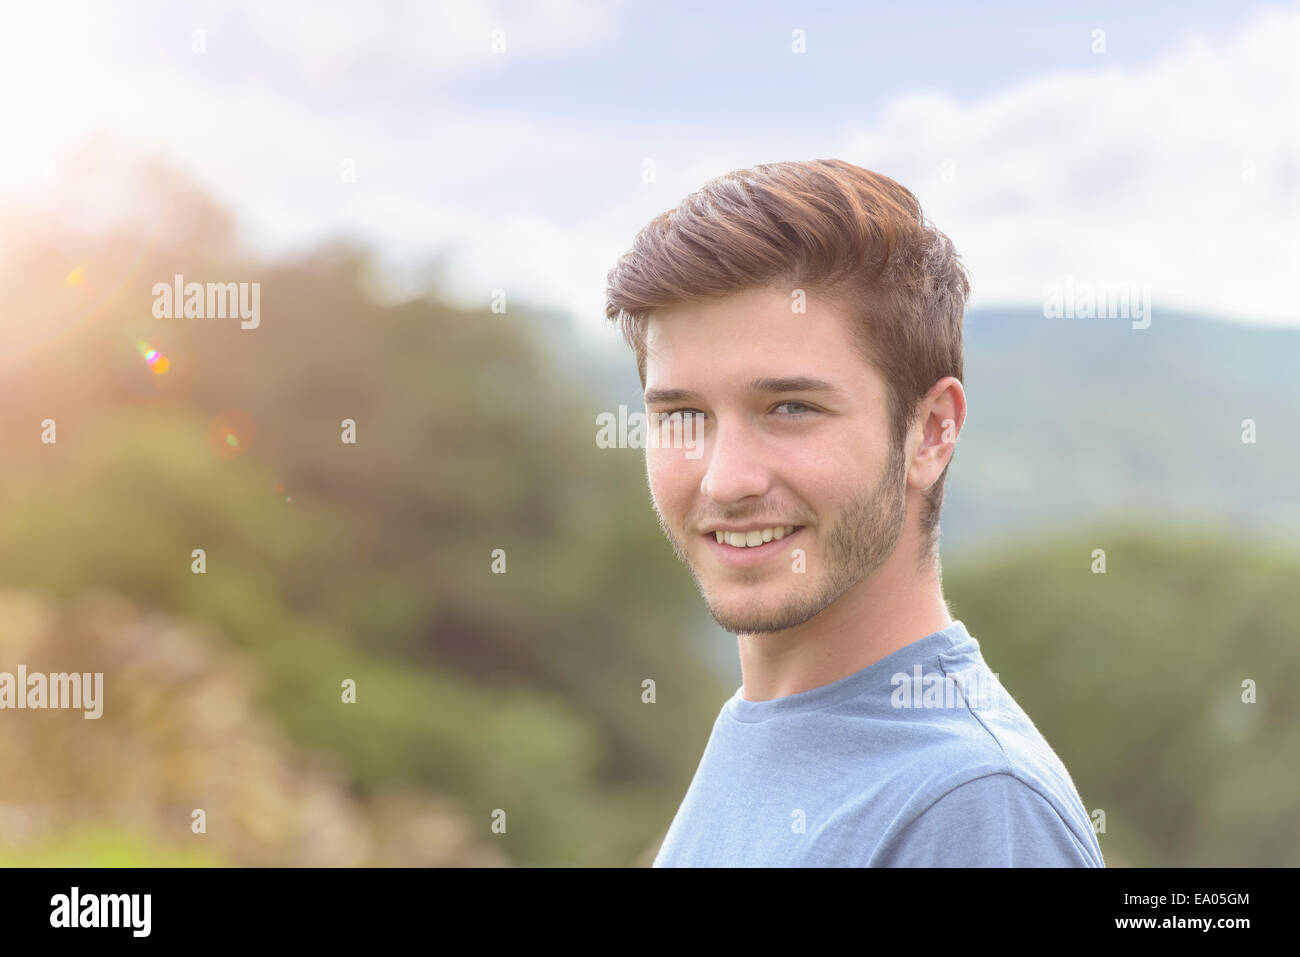 Portrait of young man smiling under bright sunlight Stock Photo